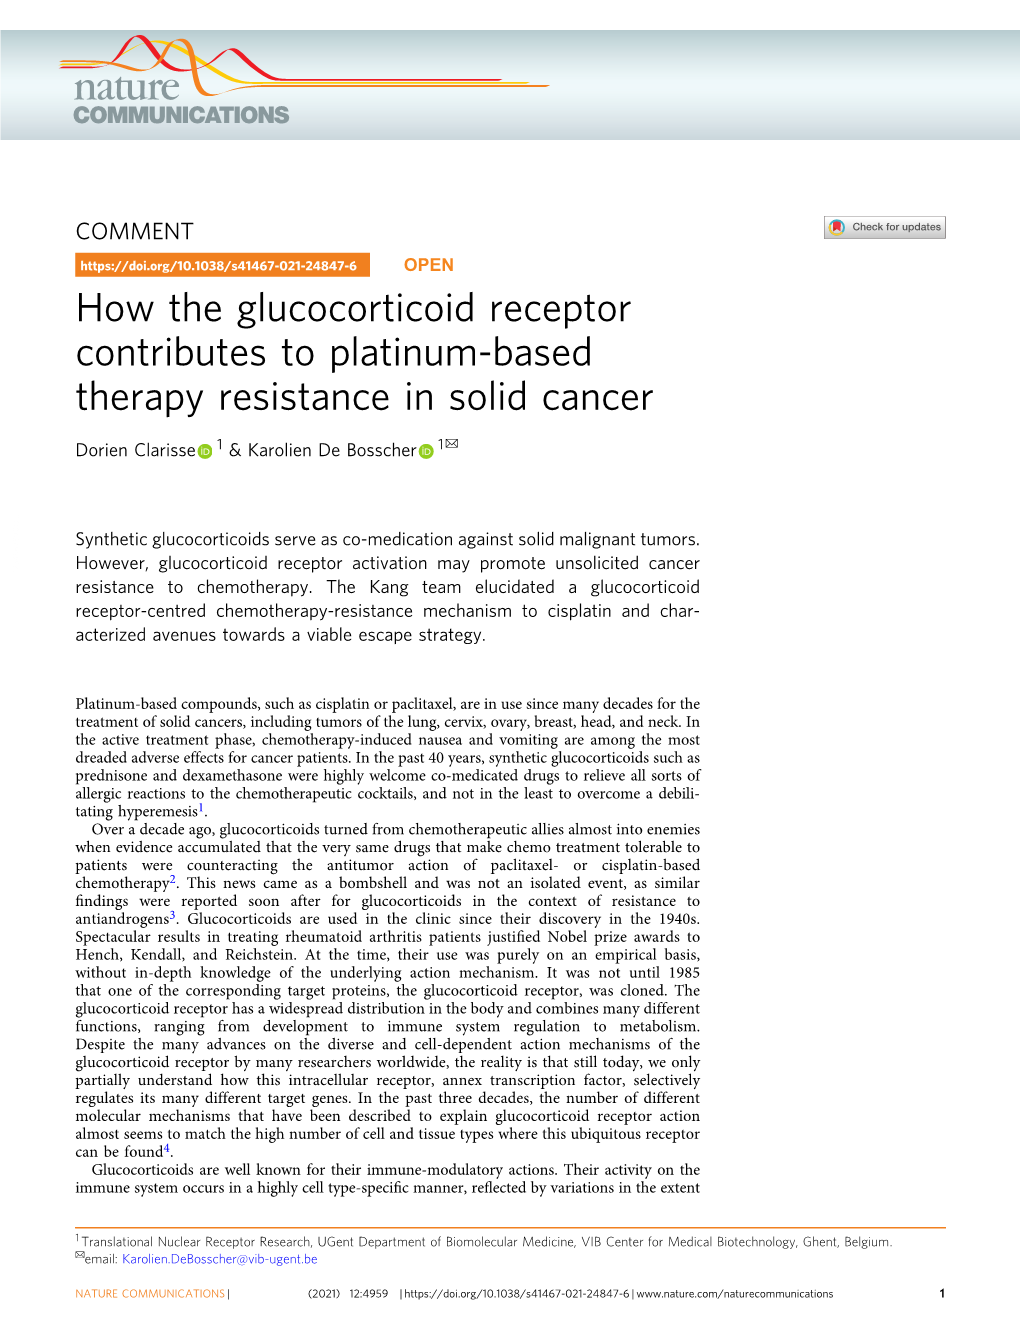 How the Glucocorticoid Receptor Contributes to Platinum-Based Therapy Resistance in Solid Cancer ✉ Dorien Clarisse 1 & Karolien De Bosscher 1